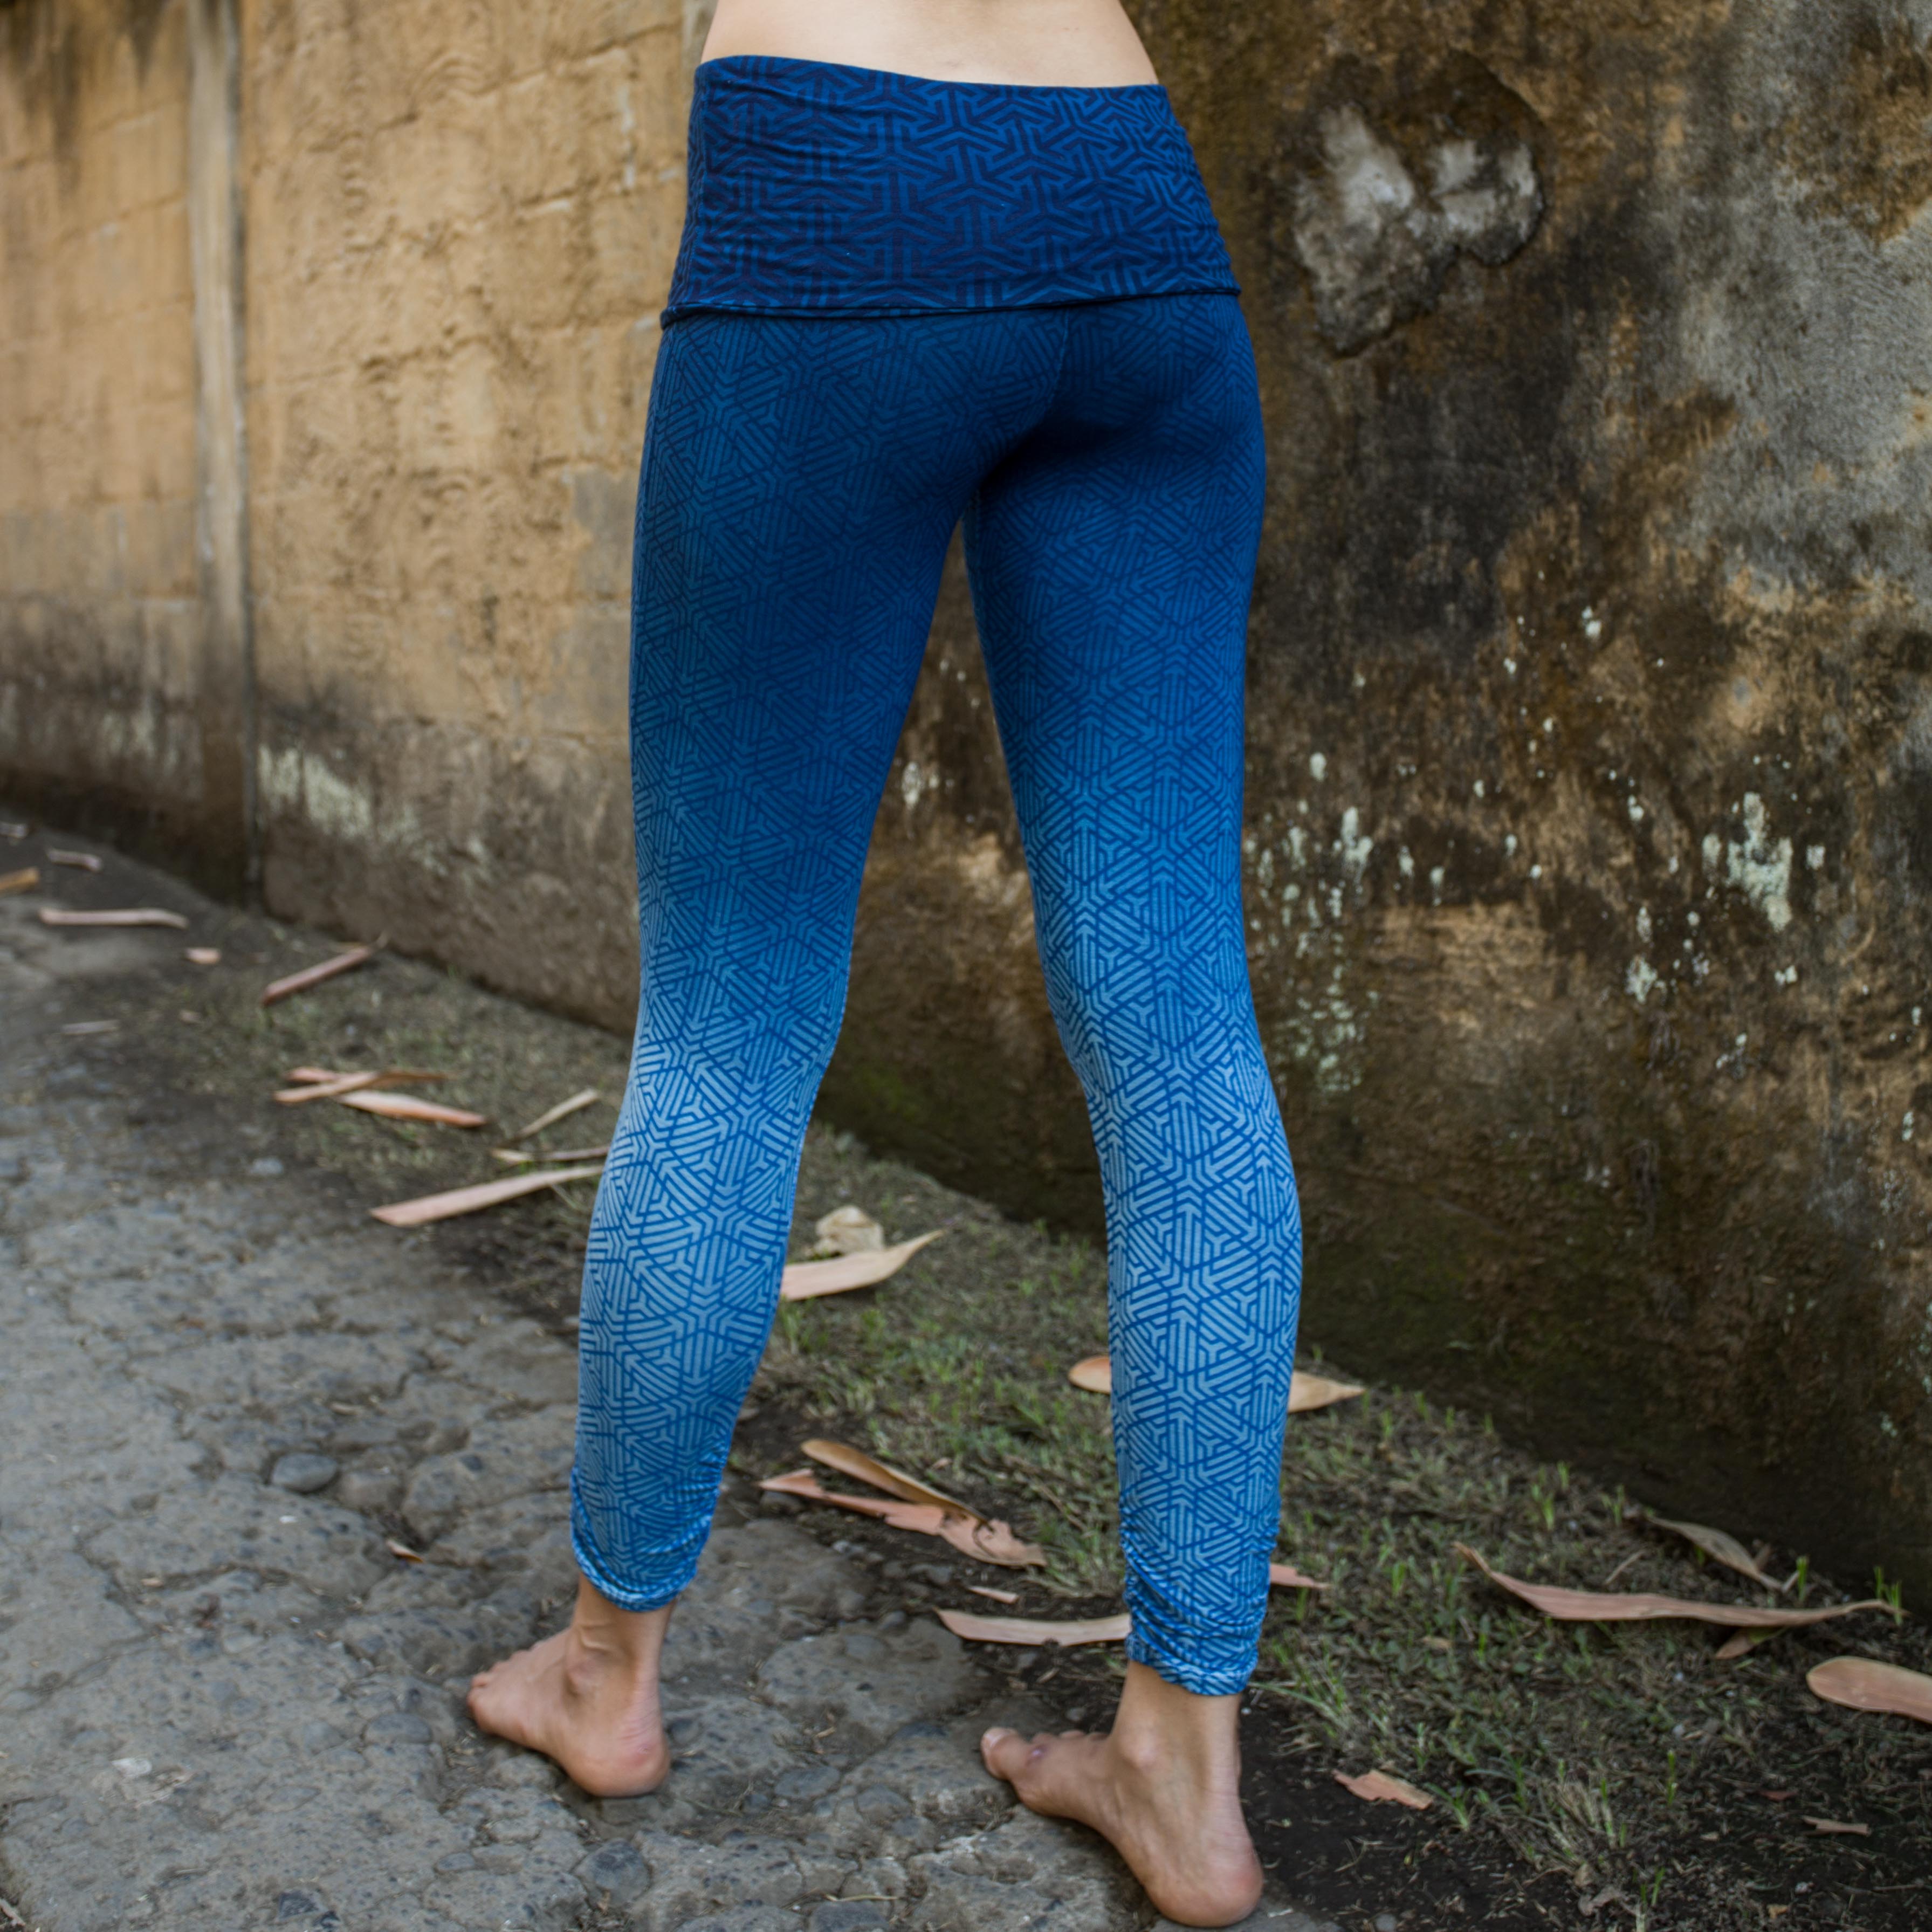 Bamboo Active – shop online for Bamboo comfort wear